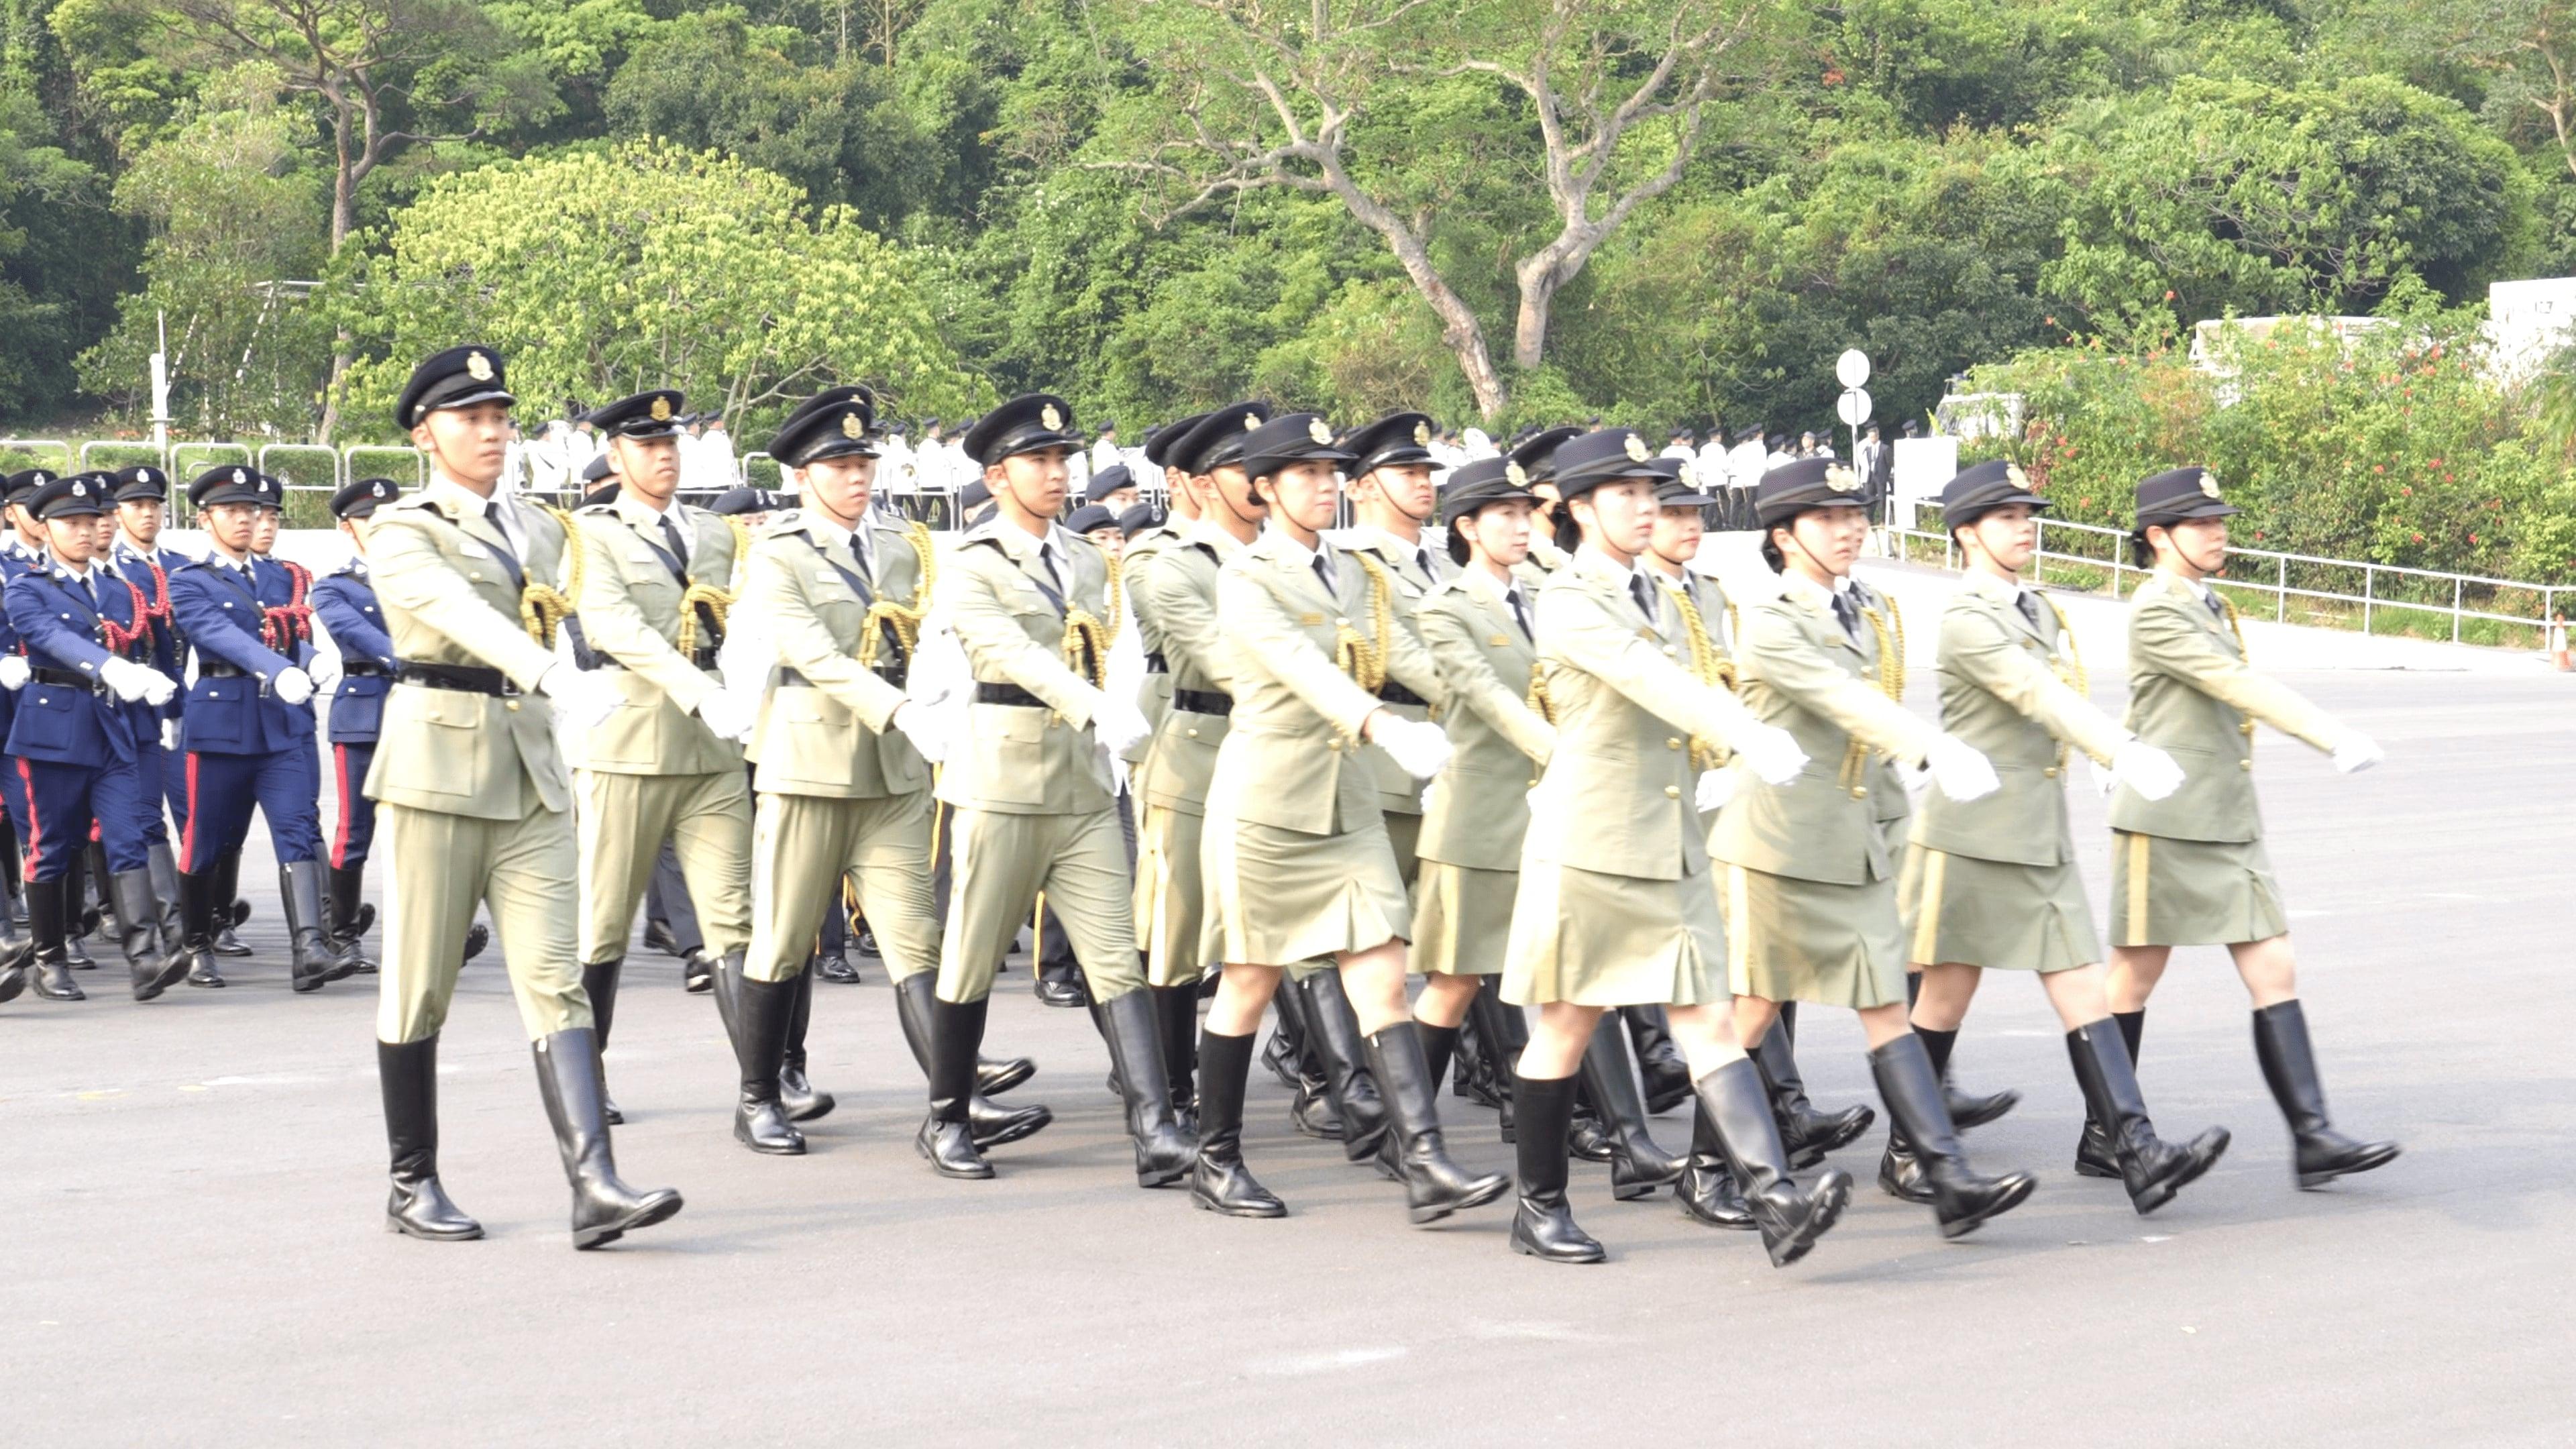 The Security Bureau and its disciplined services jointly held a National Security Education Day flag raising ceremony at the Hong Kong Police College today (April 15). Photo shows a march-in by the disciplined services ceremonial guard.